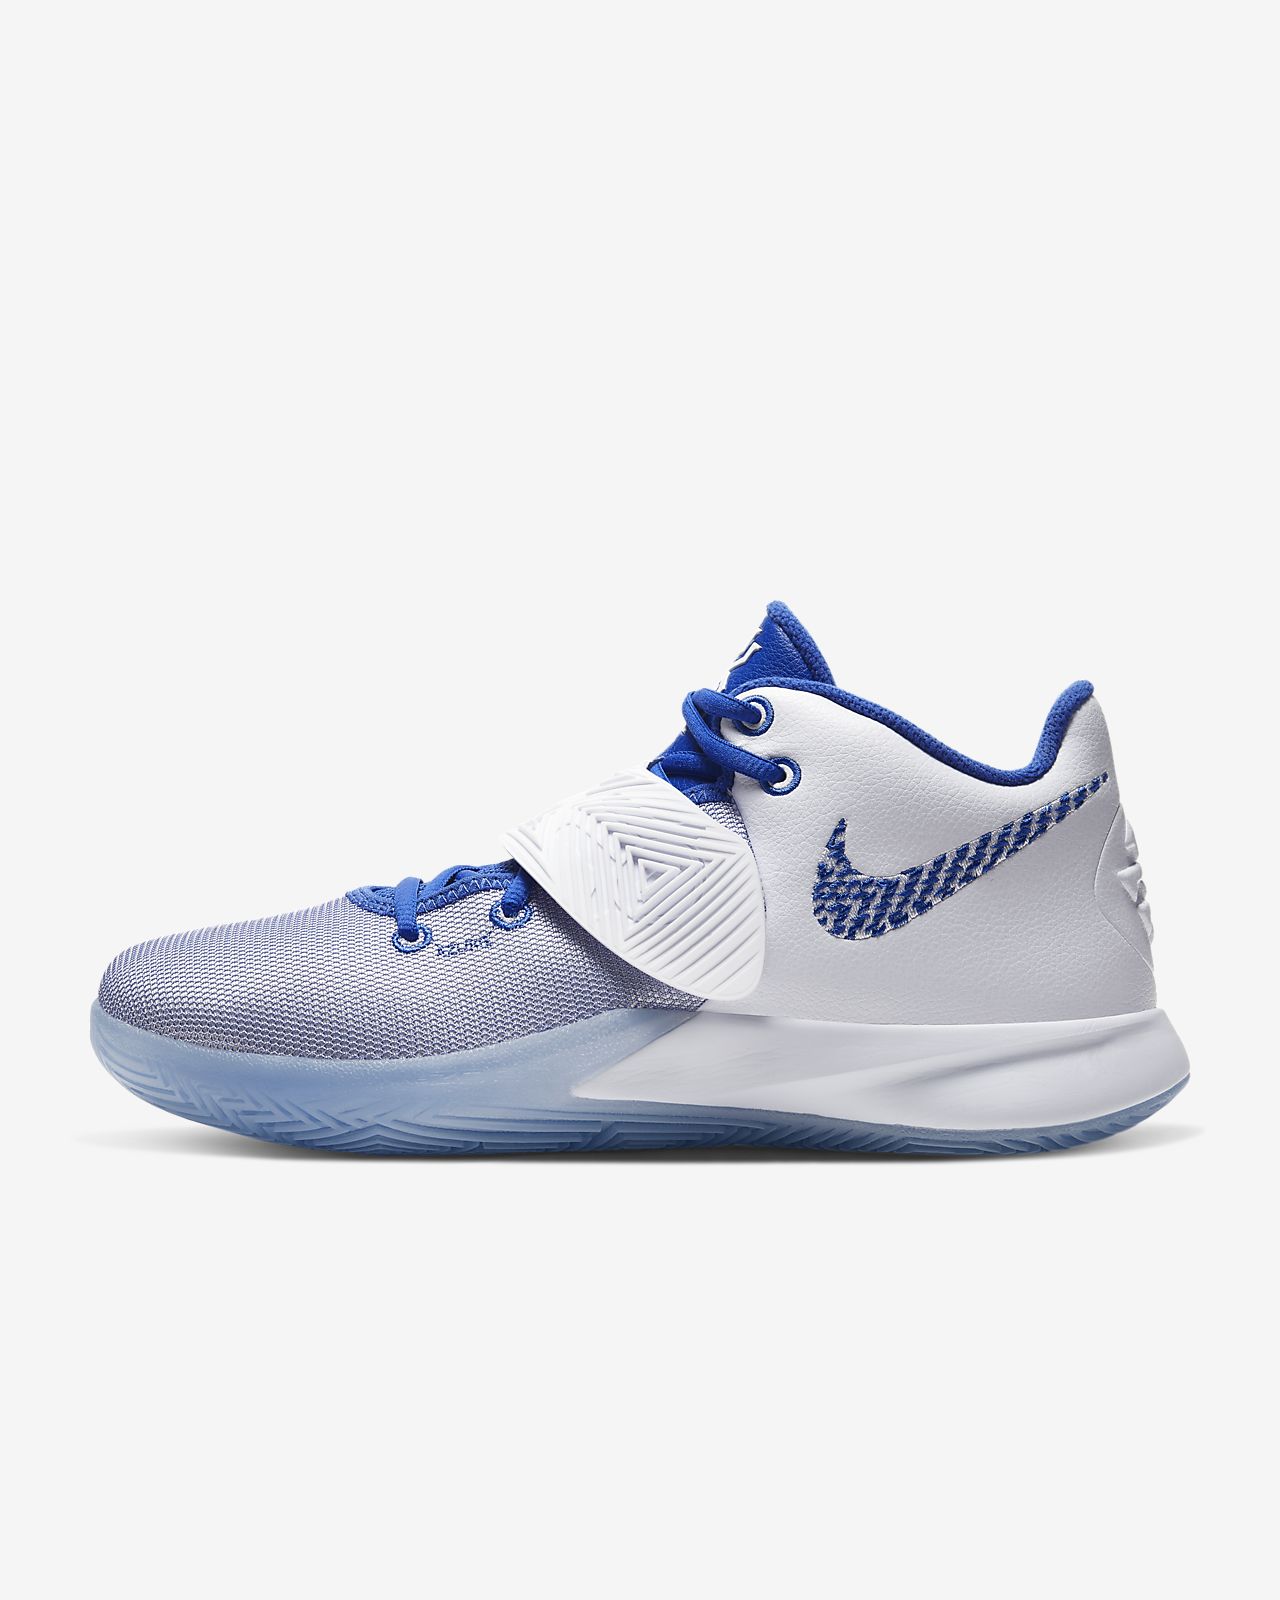 Kyrie Irving Shoes Flytrap 3 / Nike Kyrie Irving Flytrap 3 III ...